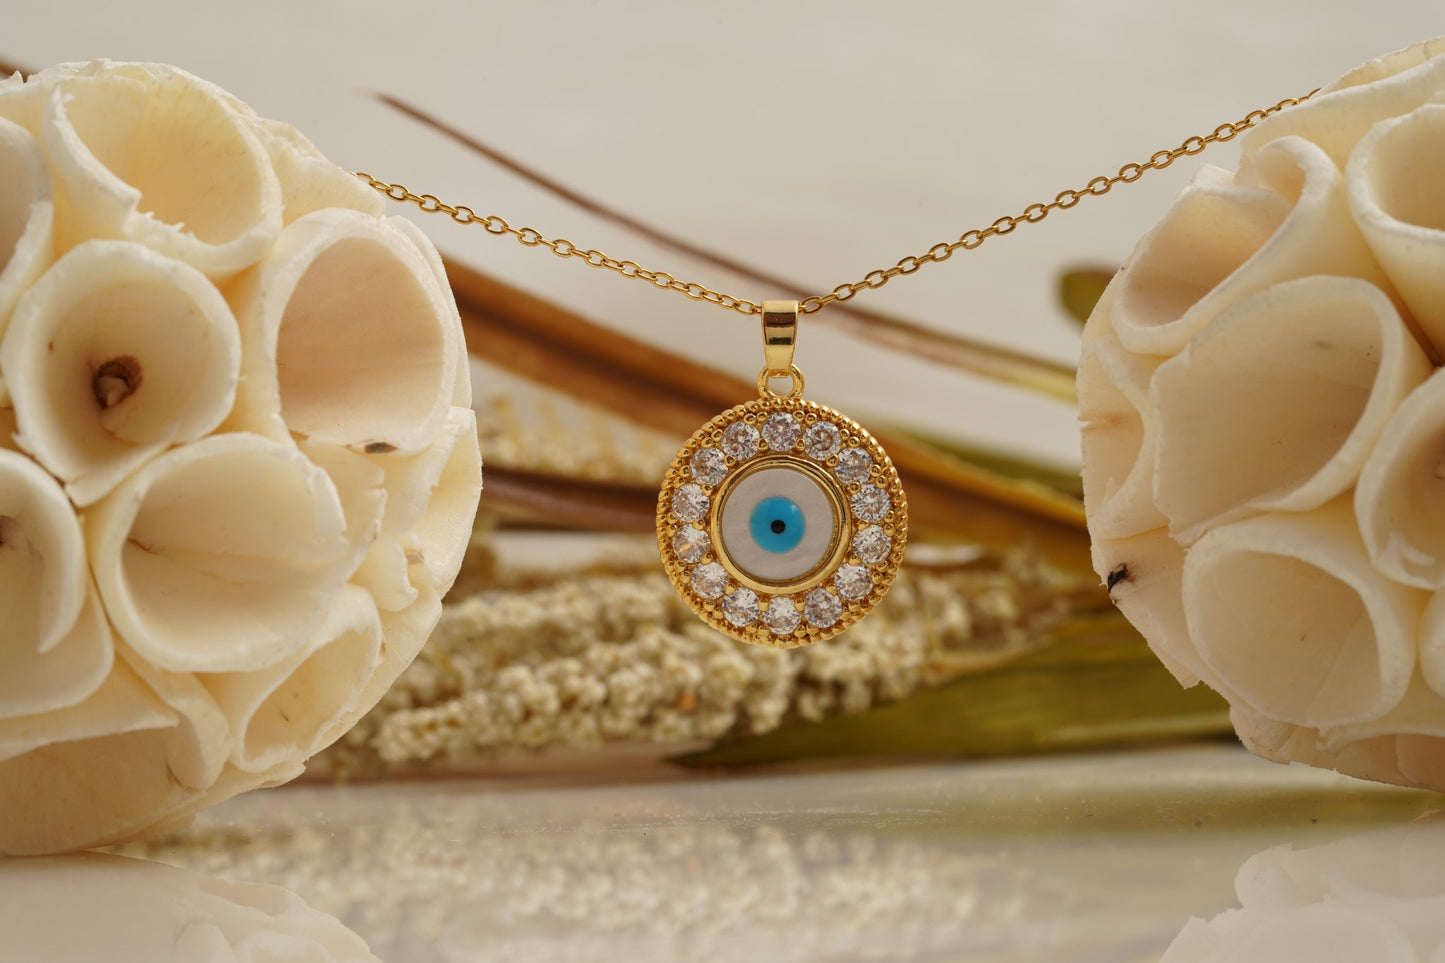 Evil Eye Pendant Necklace With Diamond With Gold Chain For Women